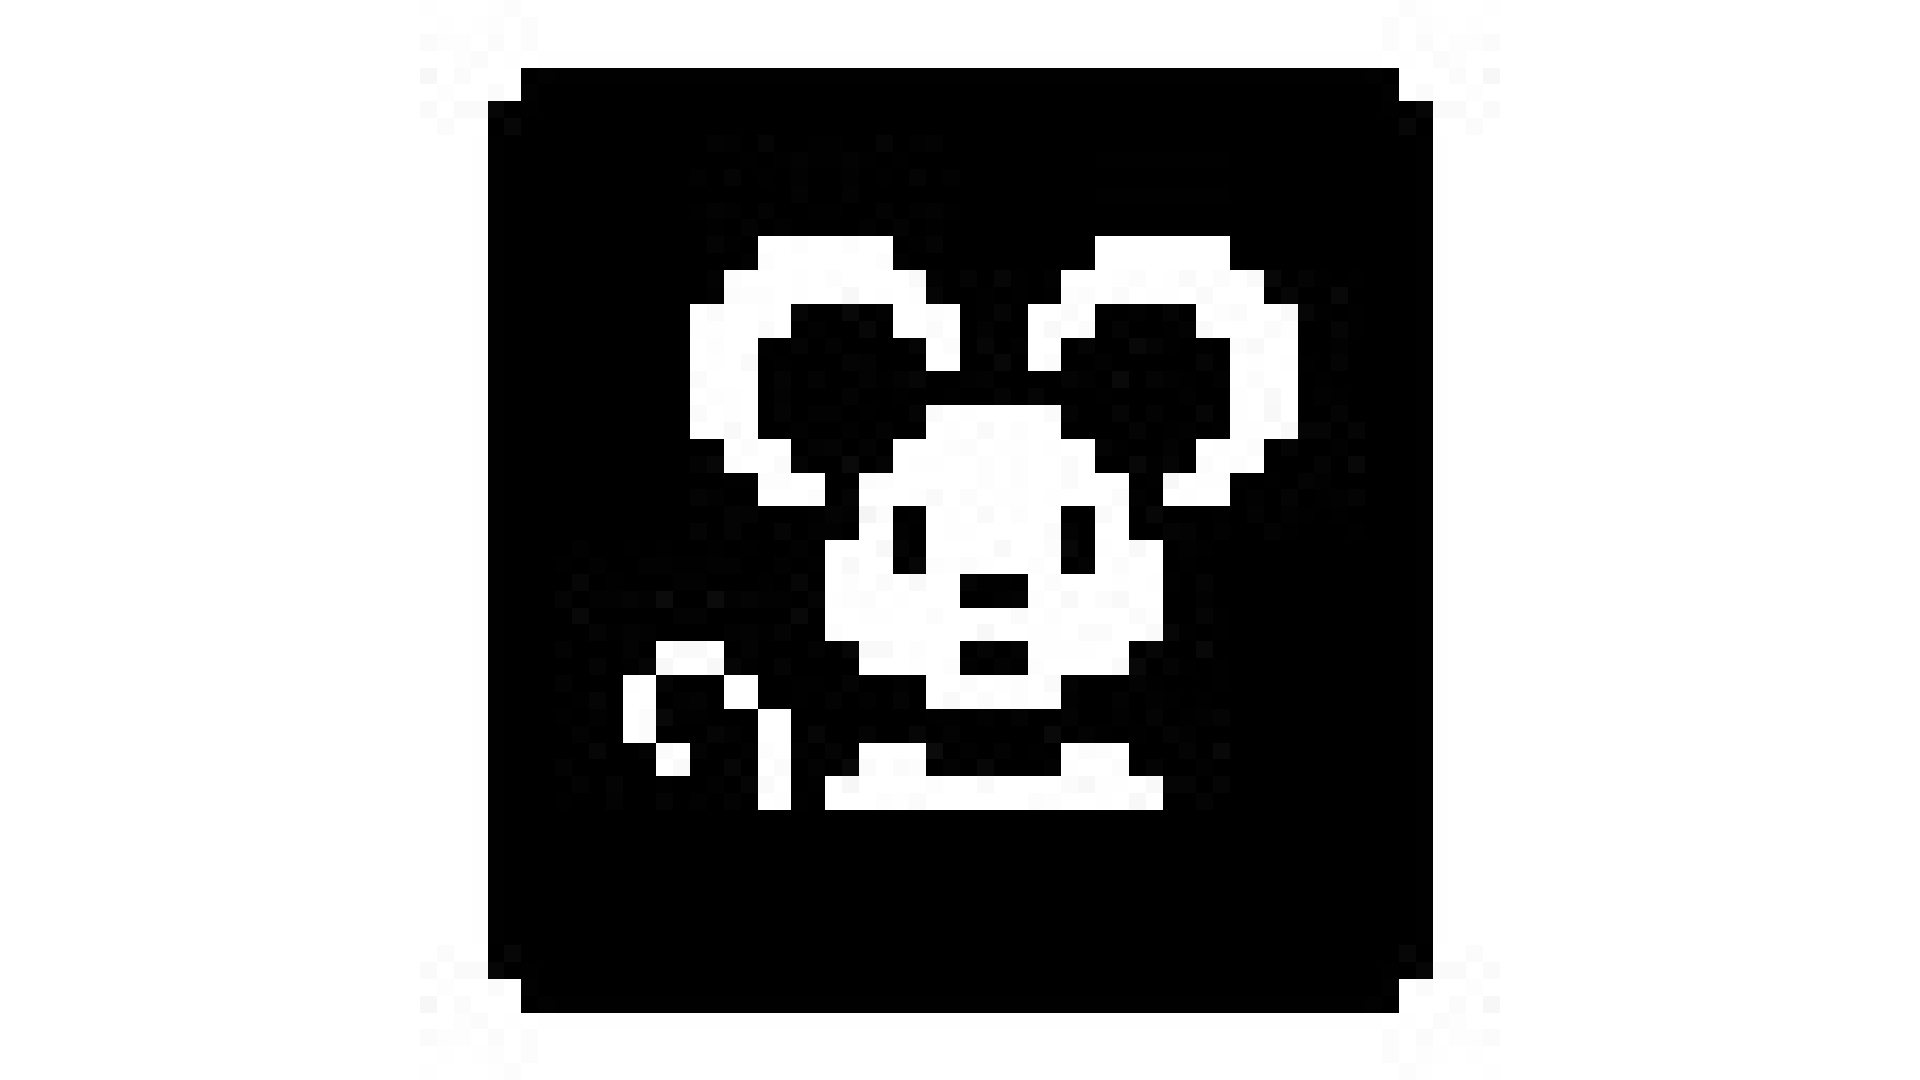 Icon for Rats!